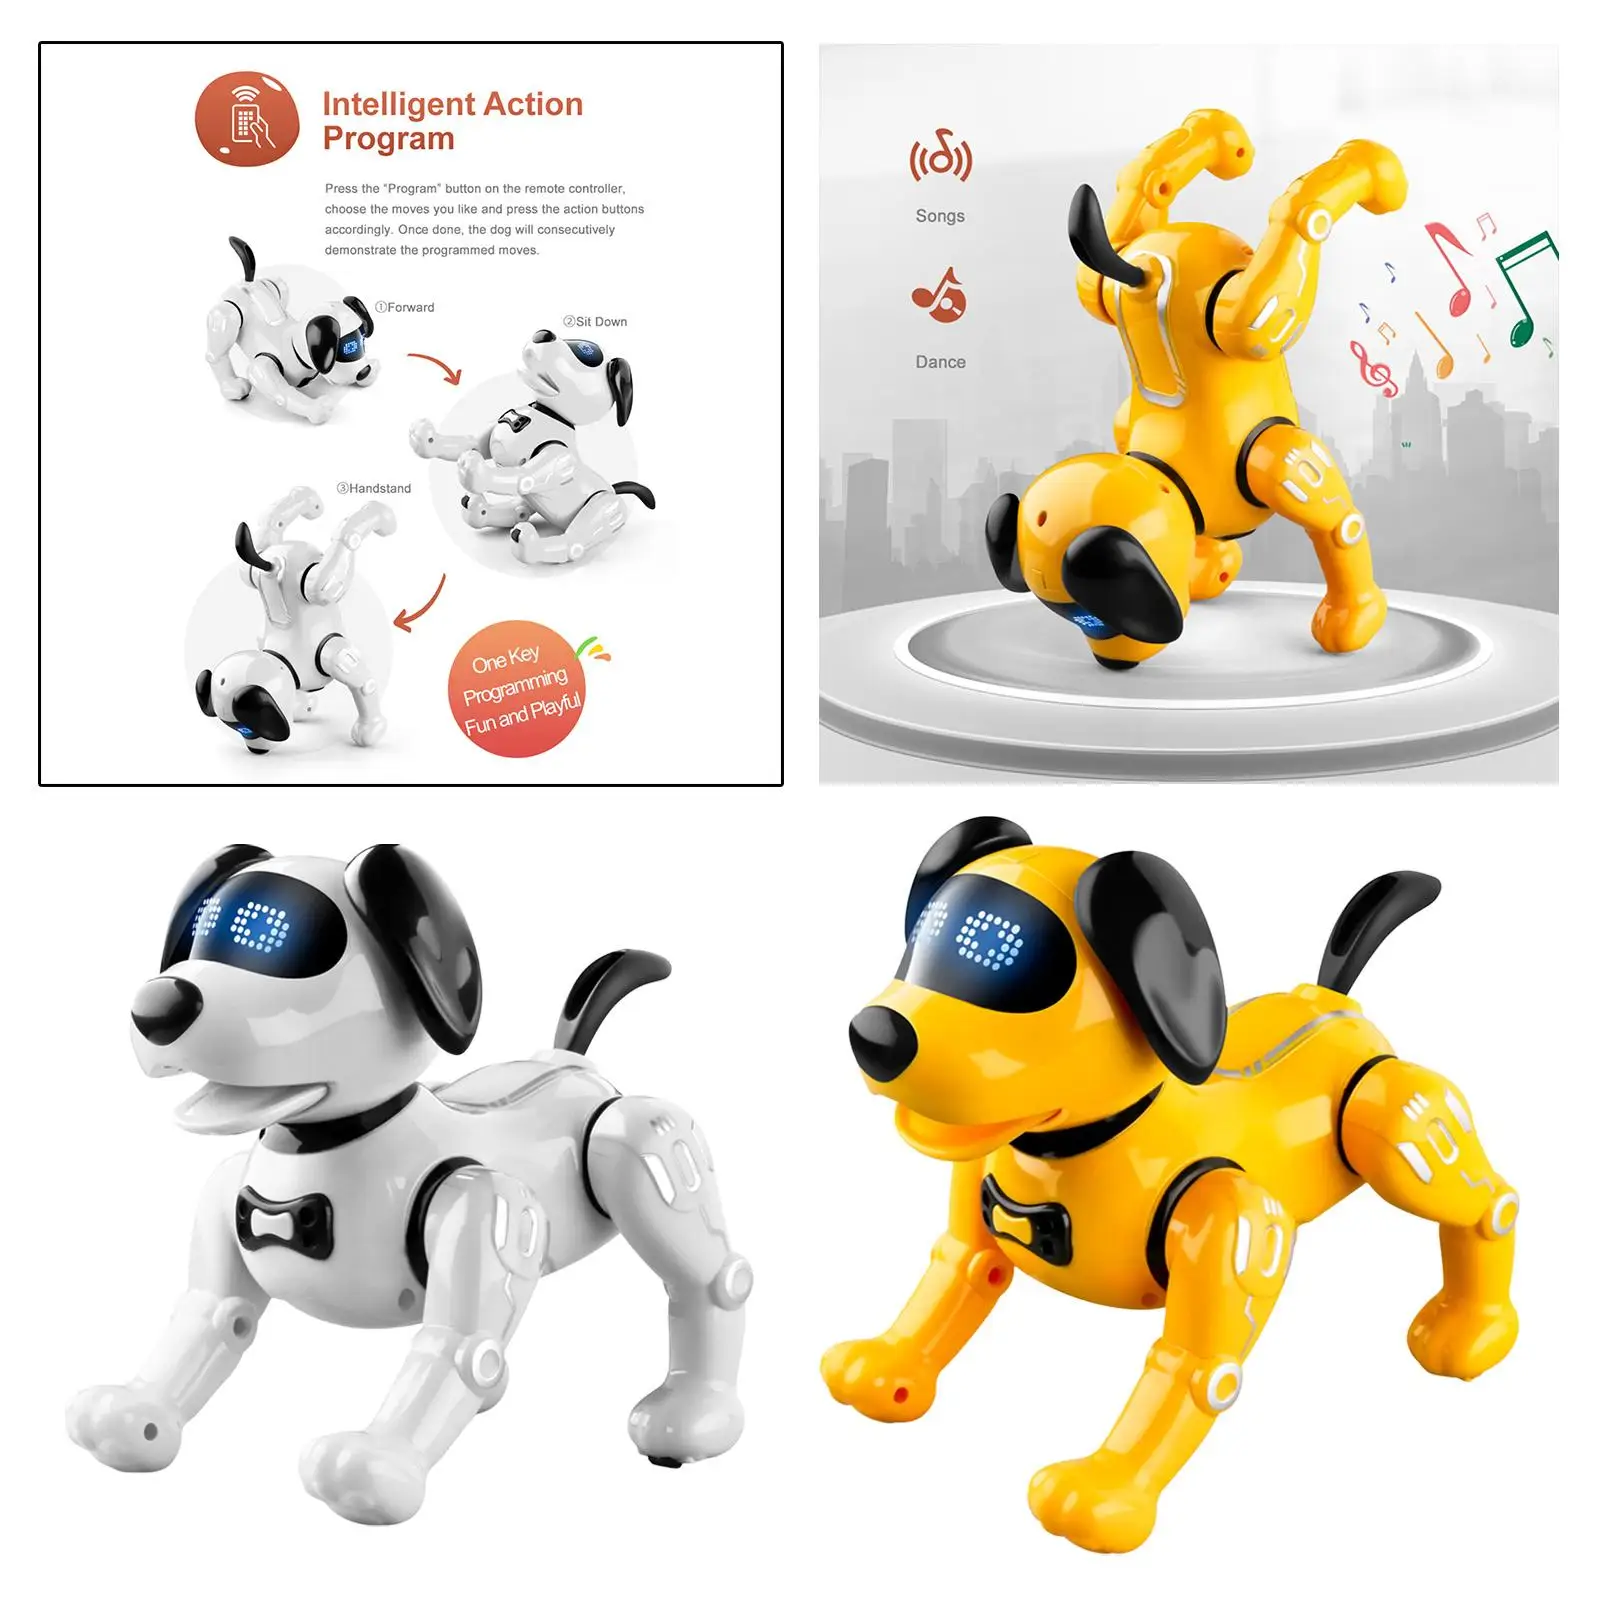 Remote Control Robot Dog Toy Push up Pet Dog Robot interactive Robotic Pet Stunt Puppy for Boys and Girls Age 5 6 7 8 9 10